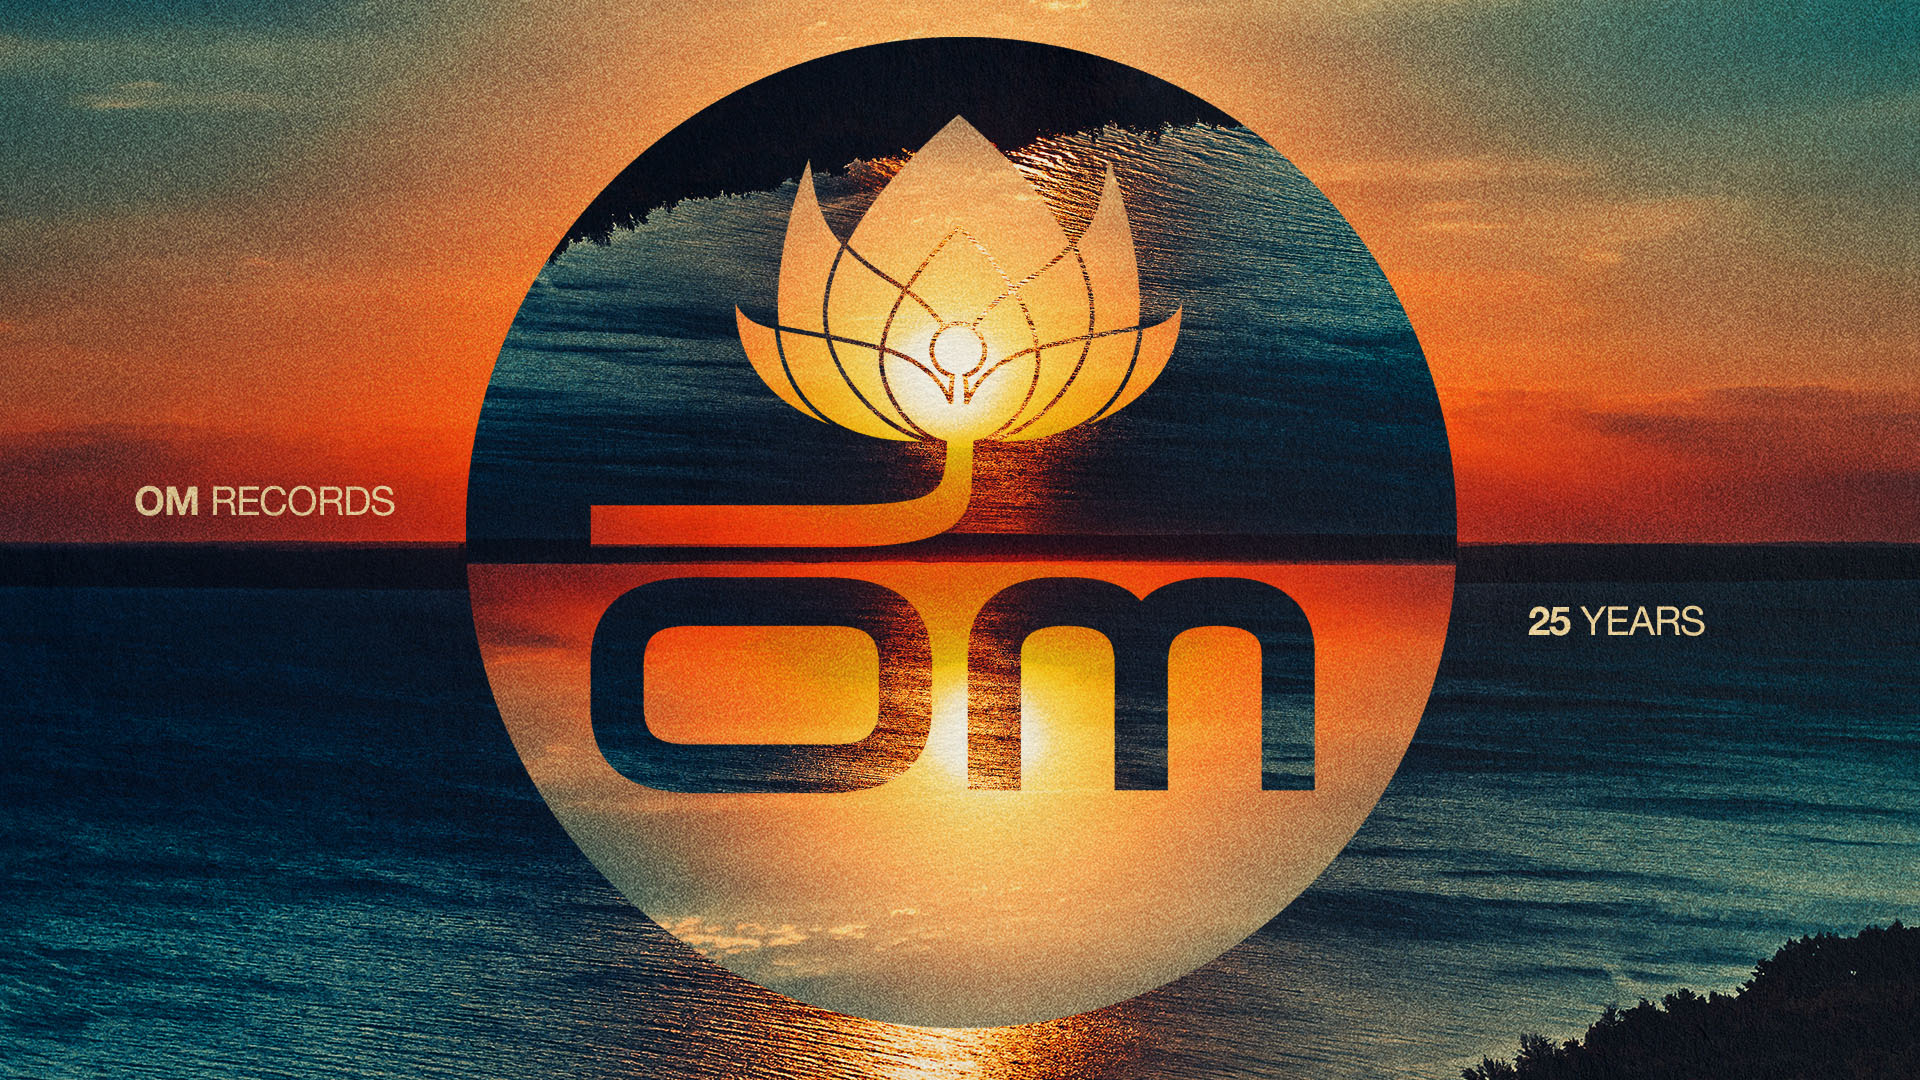 OM-Records-25-Years-16x9